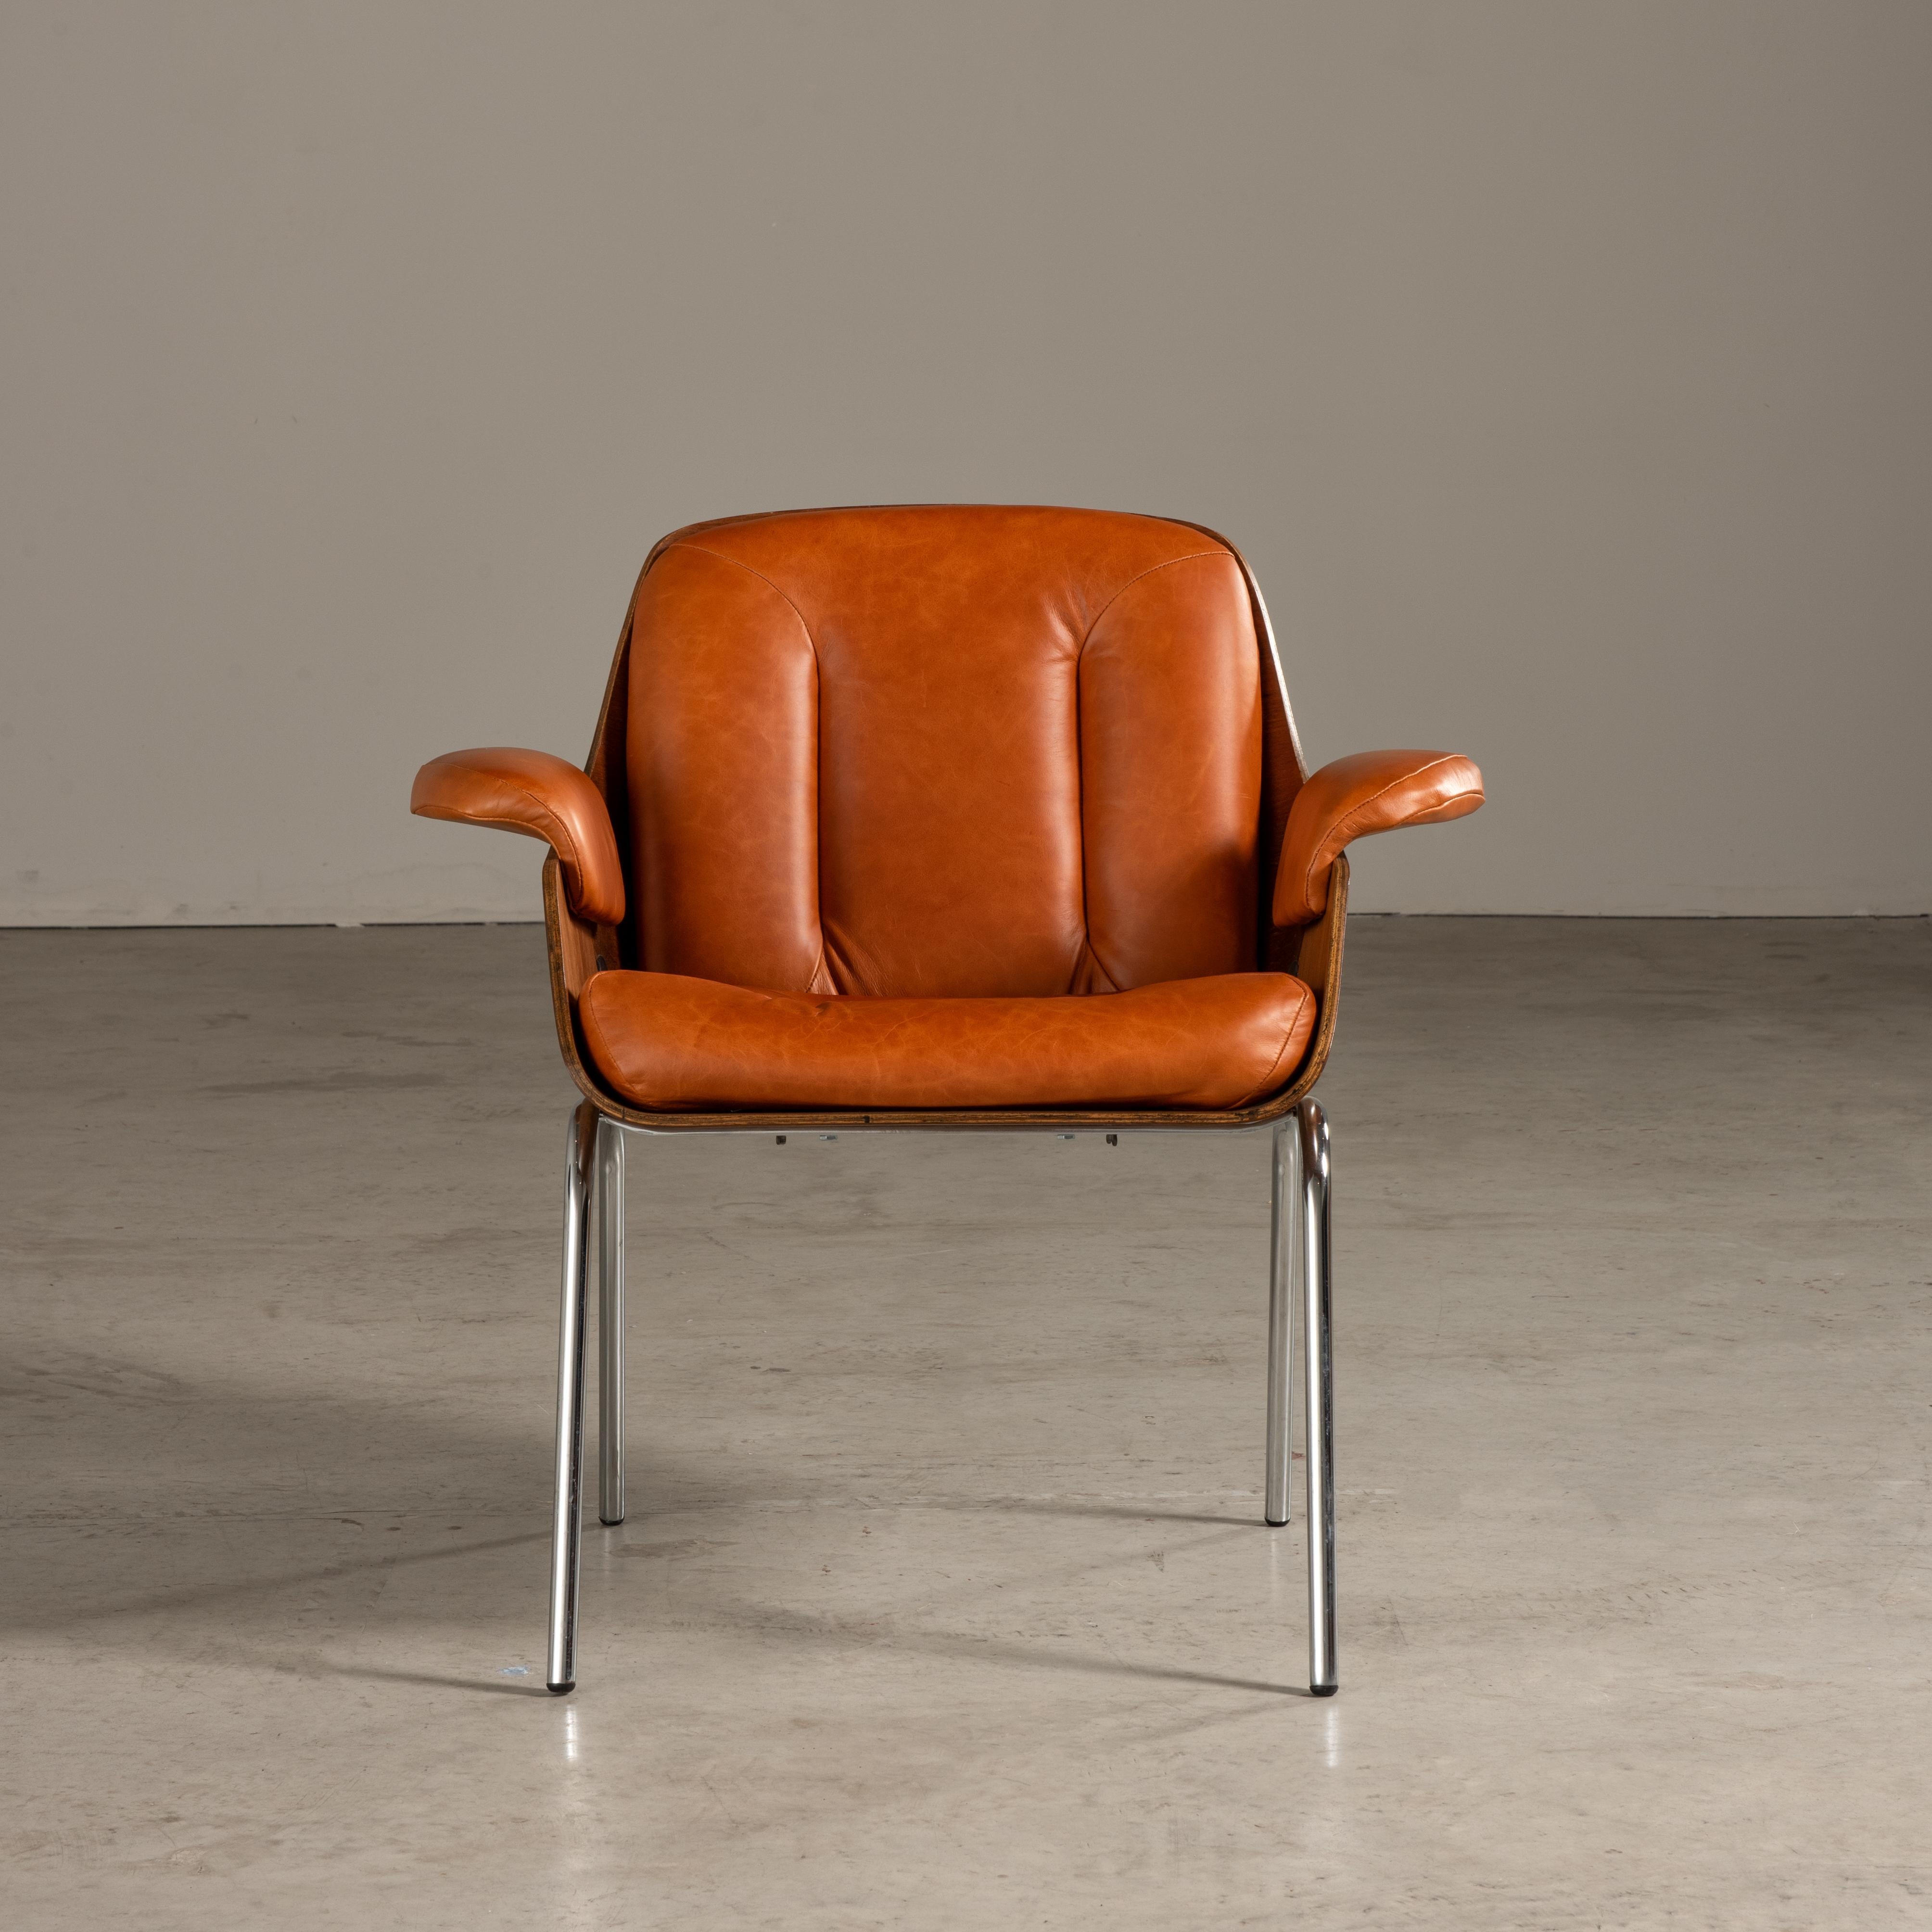 Armchair with Wood, Leather and Steel, by Carlo Fongaro, Brazilian Mid-Century In Good Condition For Sale In Sao Paulo, SP